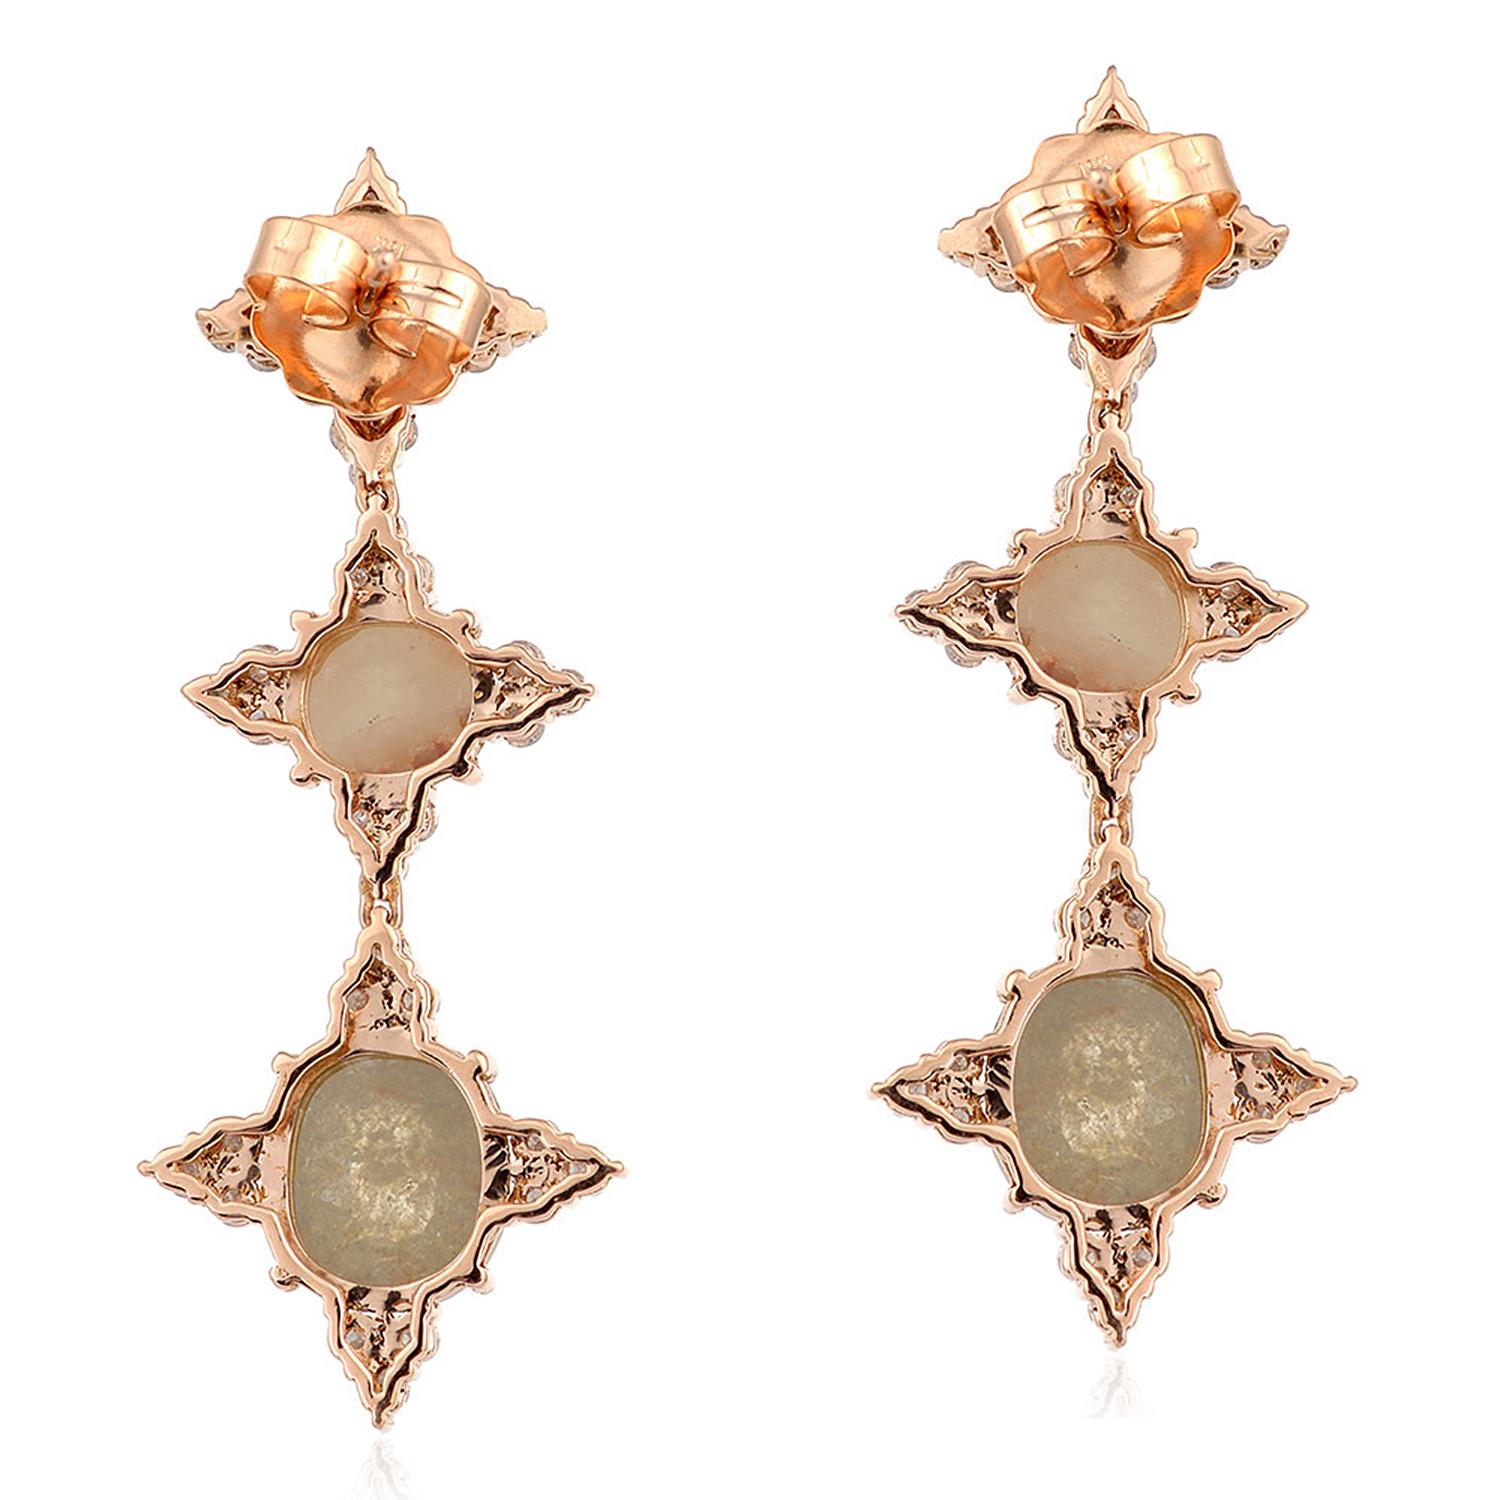 Cast from 18-karat gold, these stunning earrings are hand set with 12.64 carats of fancy natural diamonds. The slice diamonds are covered in a surface of light-reflecting facets, pure raw elegance.

FOLLOW  MEGHNA JEWELS storefront to view the